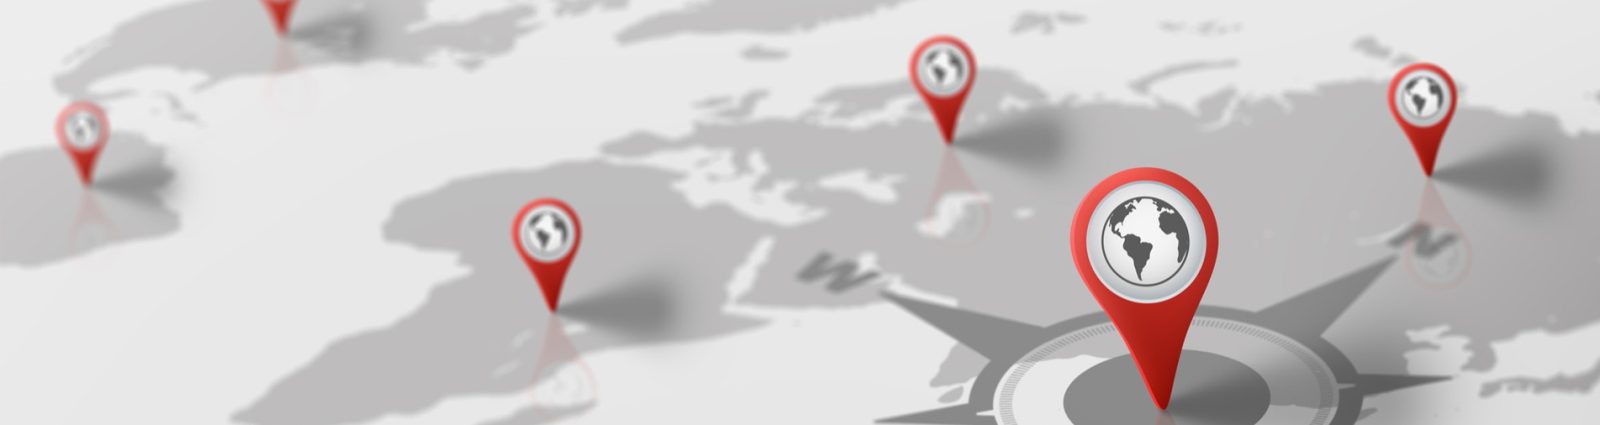 10 Strategies For Ranking Higher In Google Maps [Infographic]